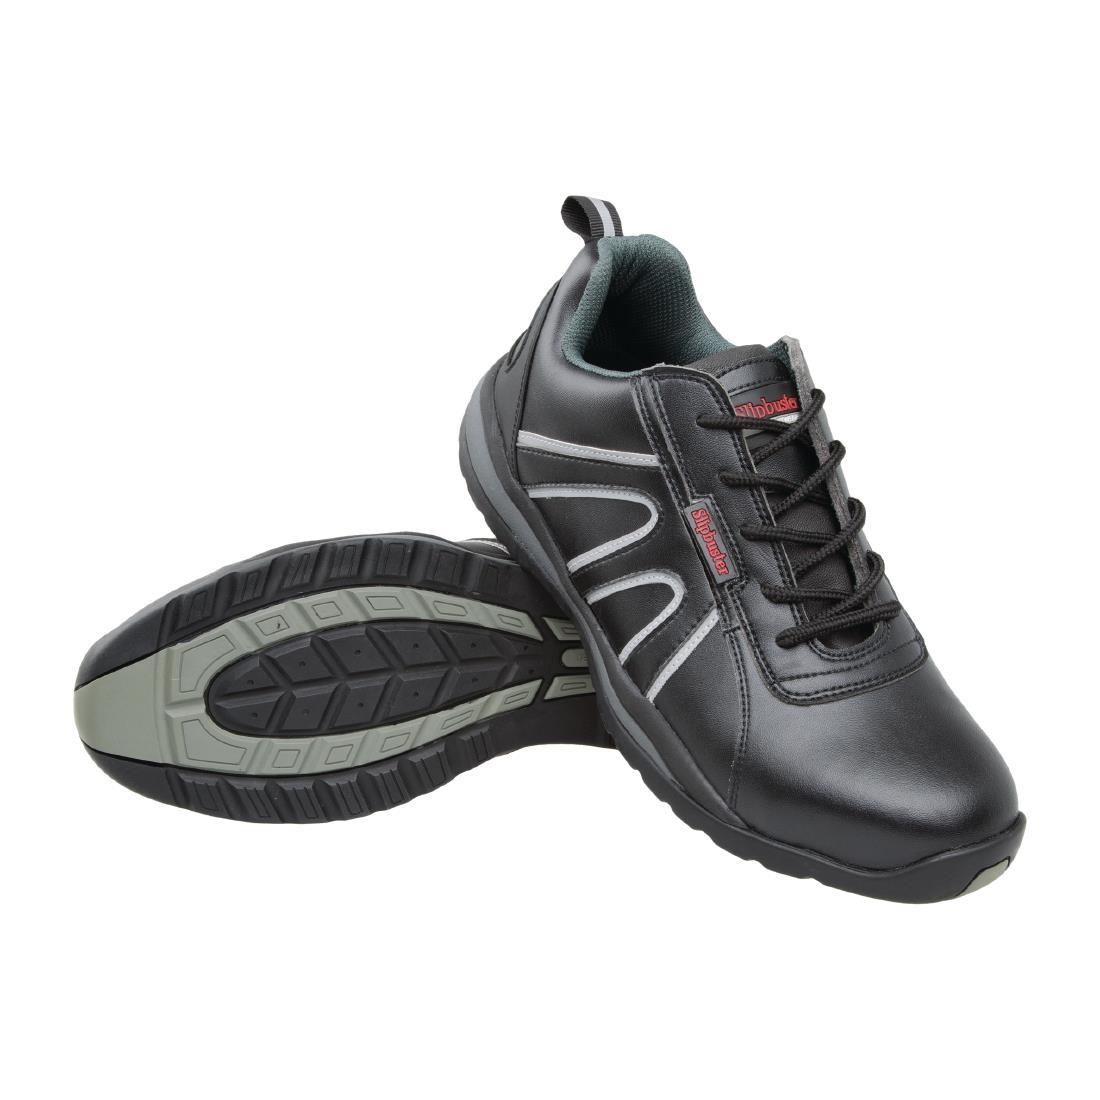 Slipbuster Safety Trainers Black 42 - A708-42  - 2